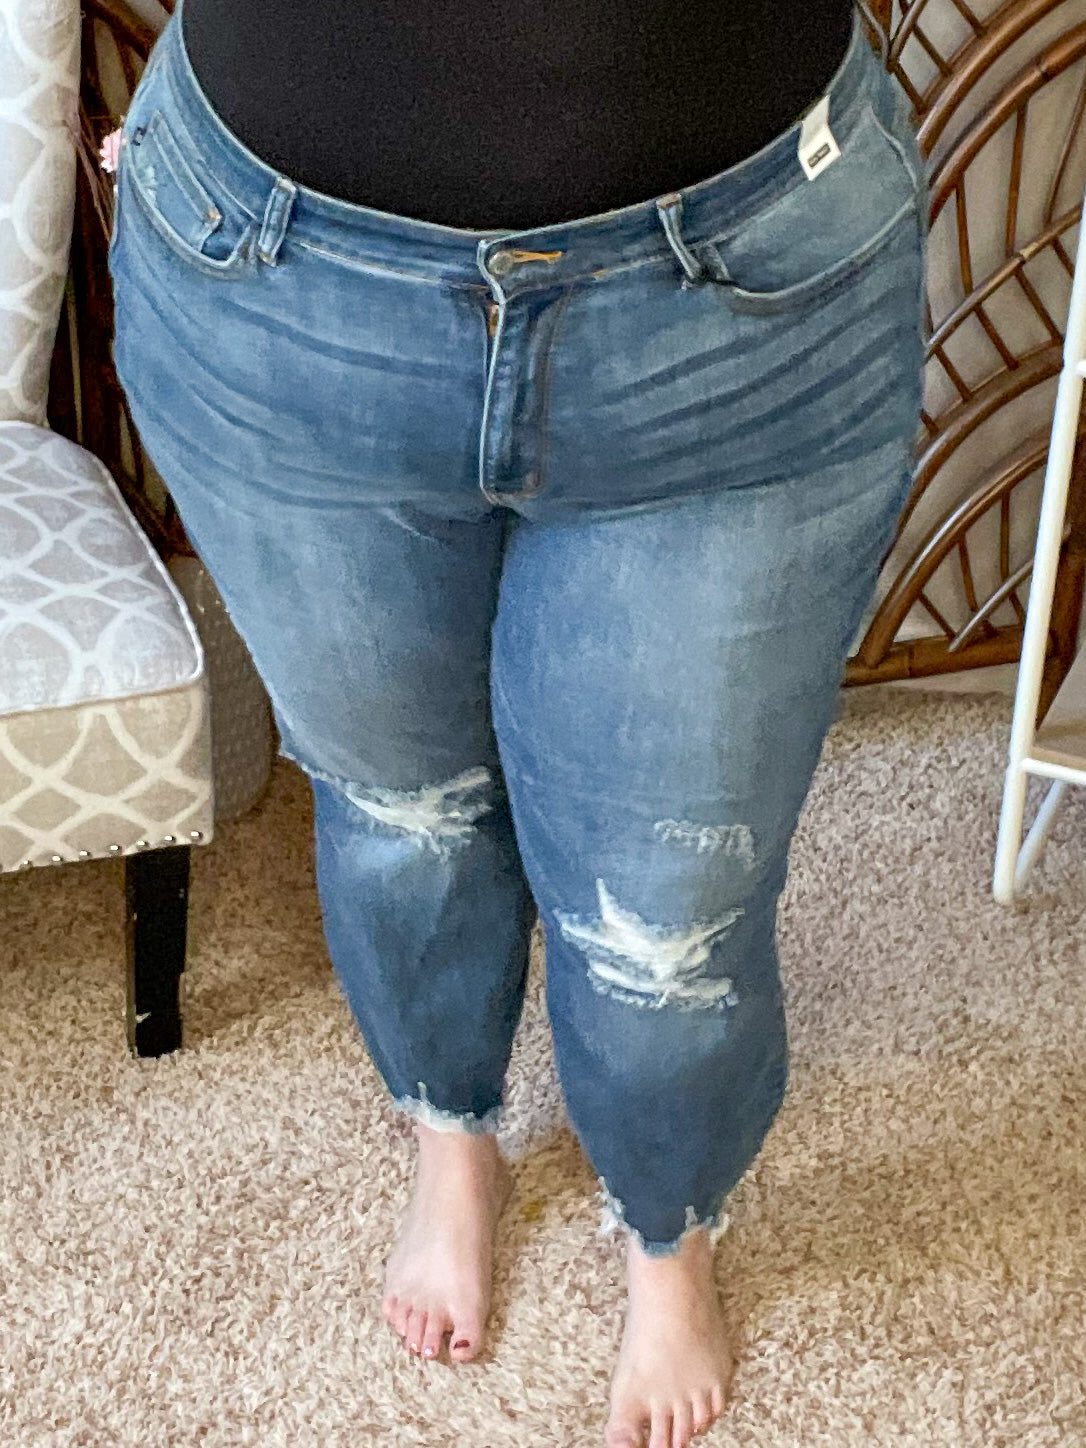 Judy Blue jeans 💙- Run big, they say size down 1 or even 2 sizes